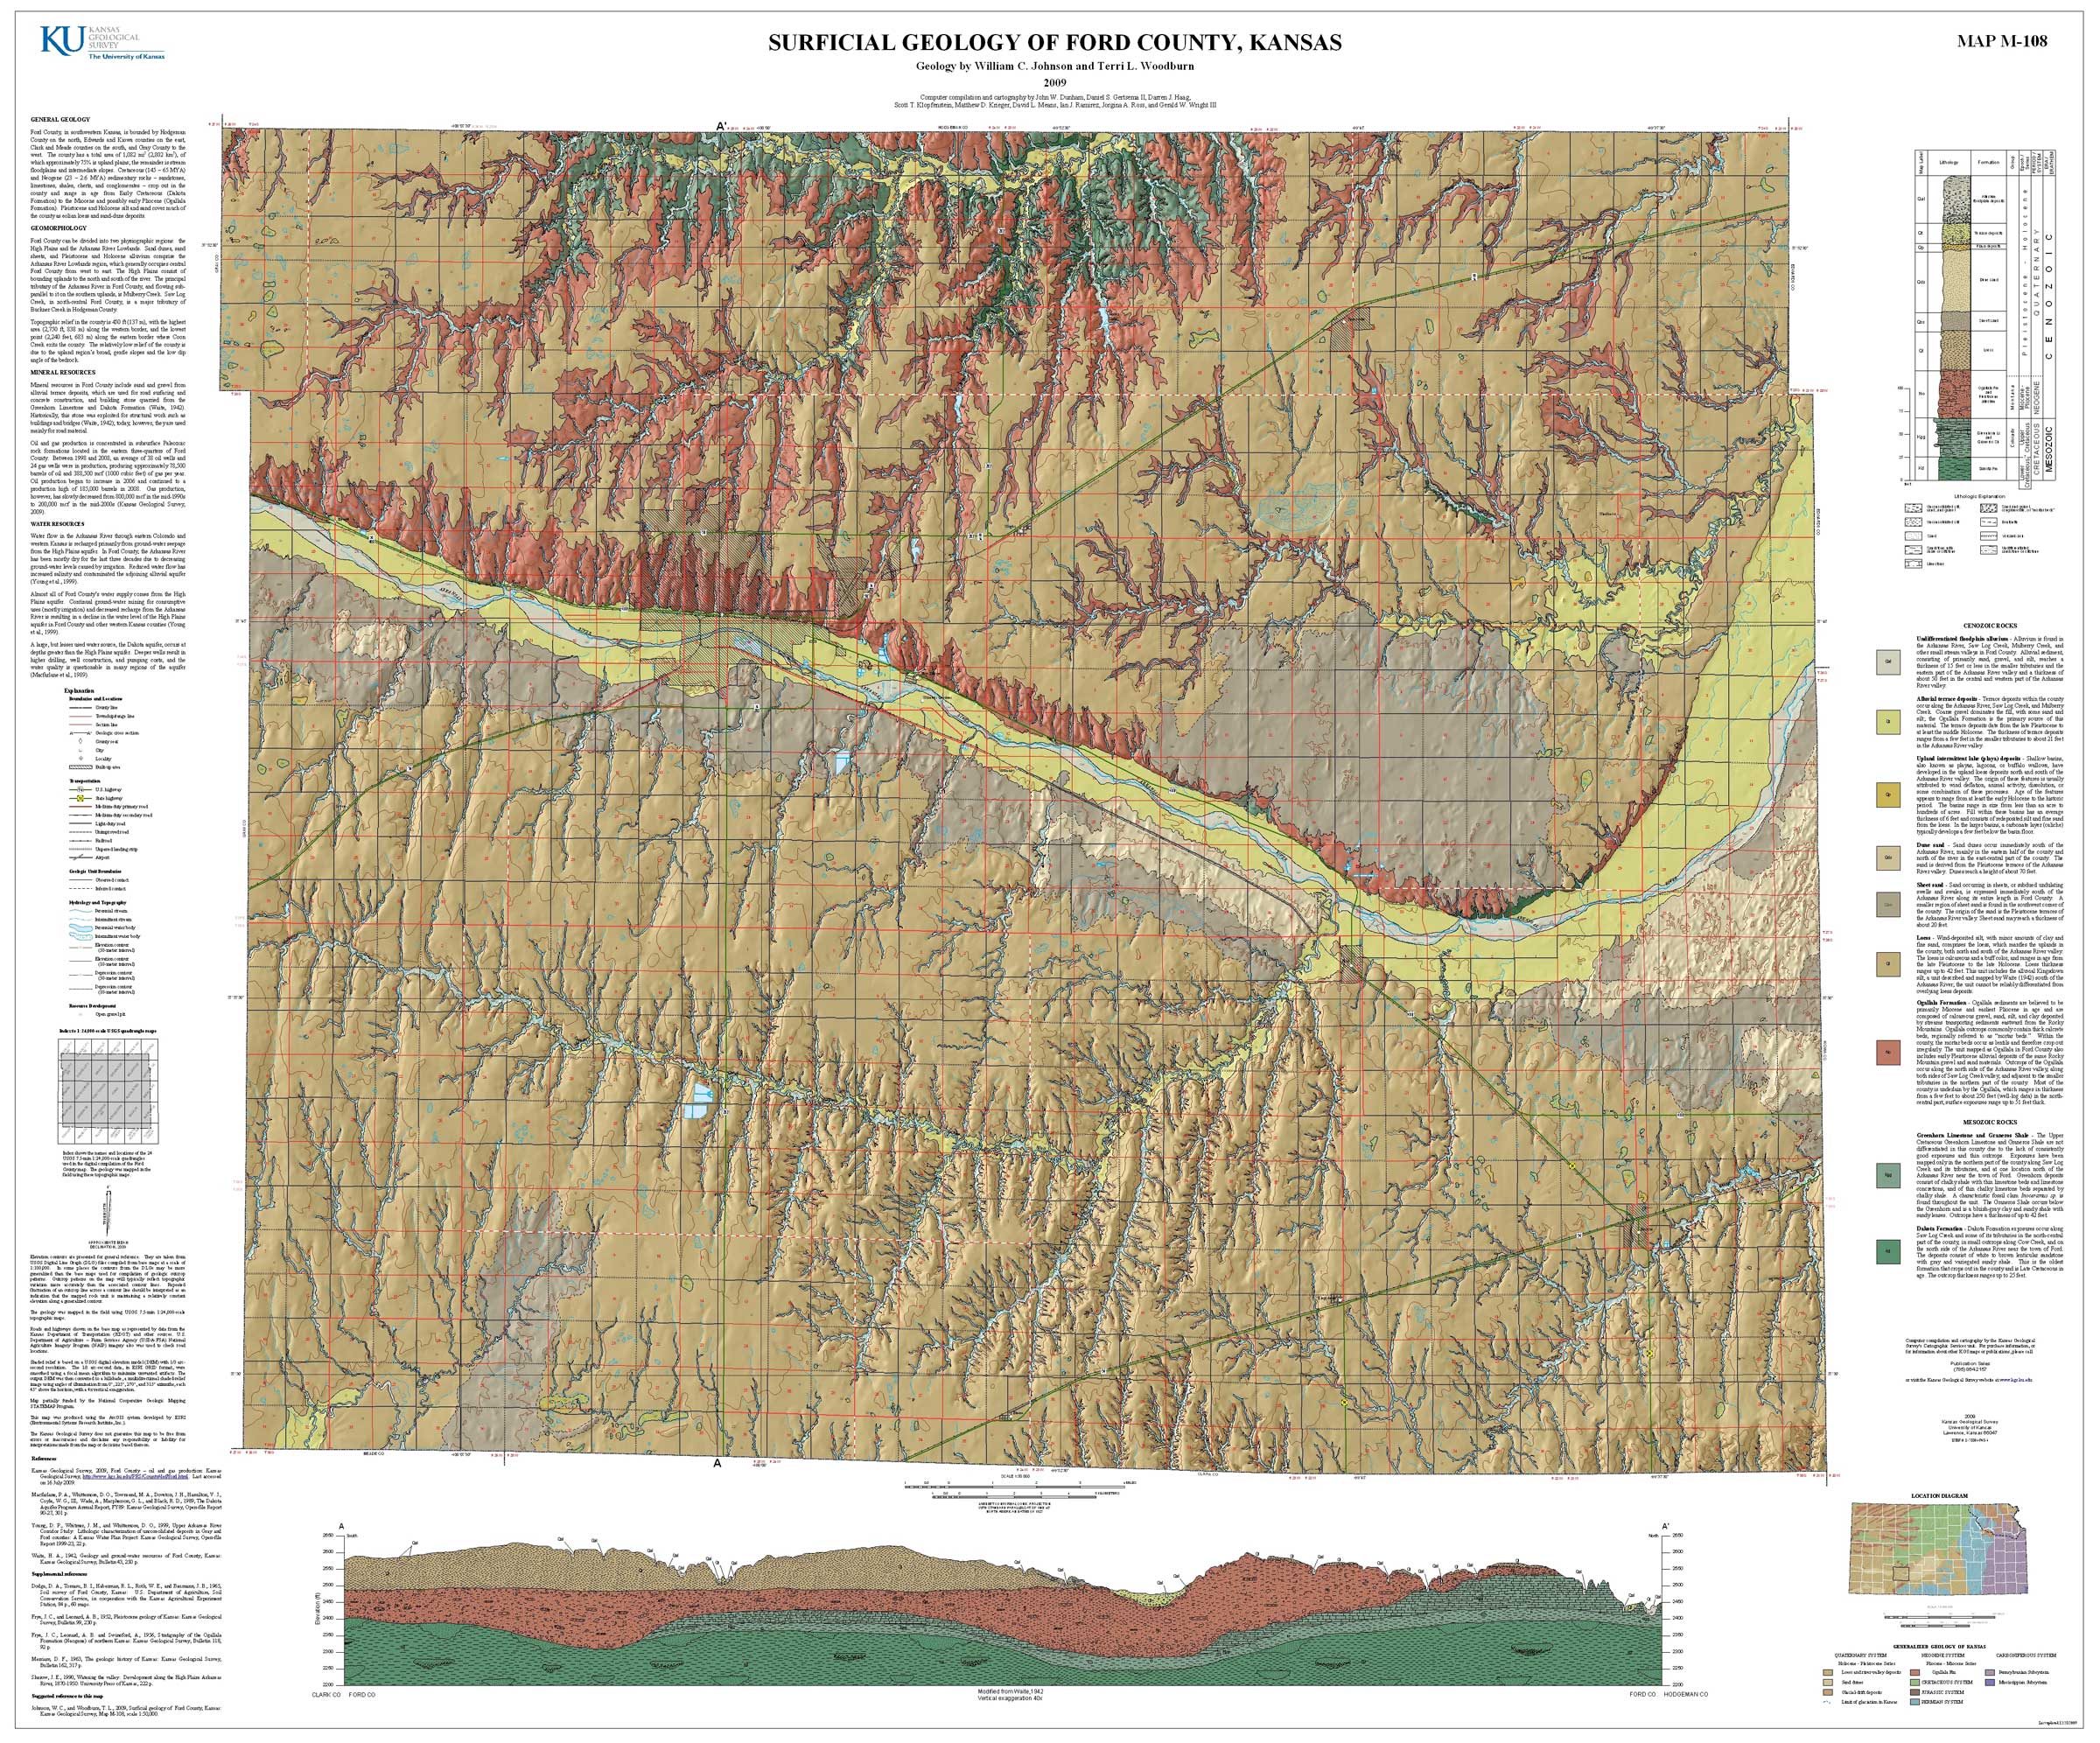 Ford County geologic map